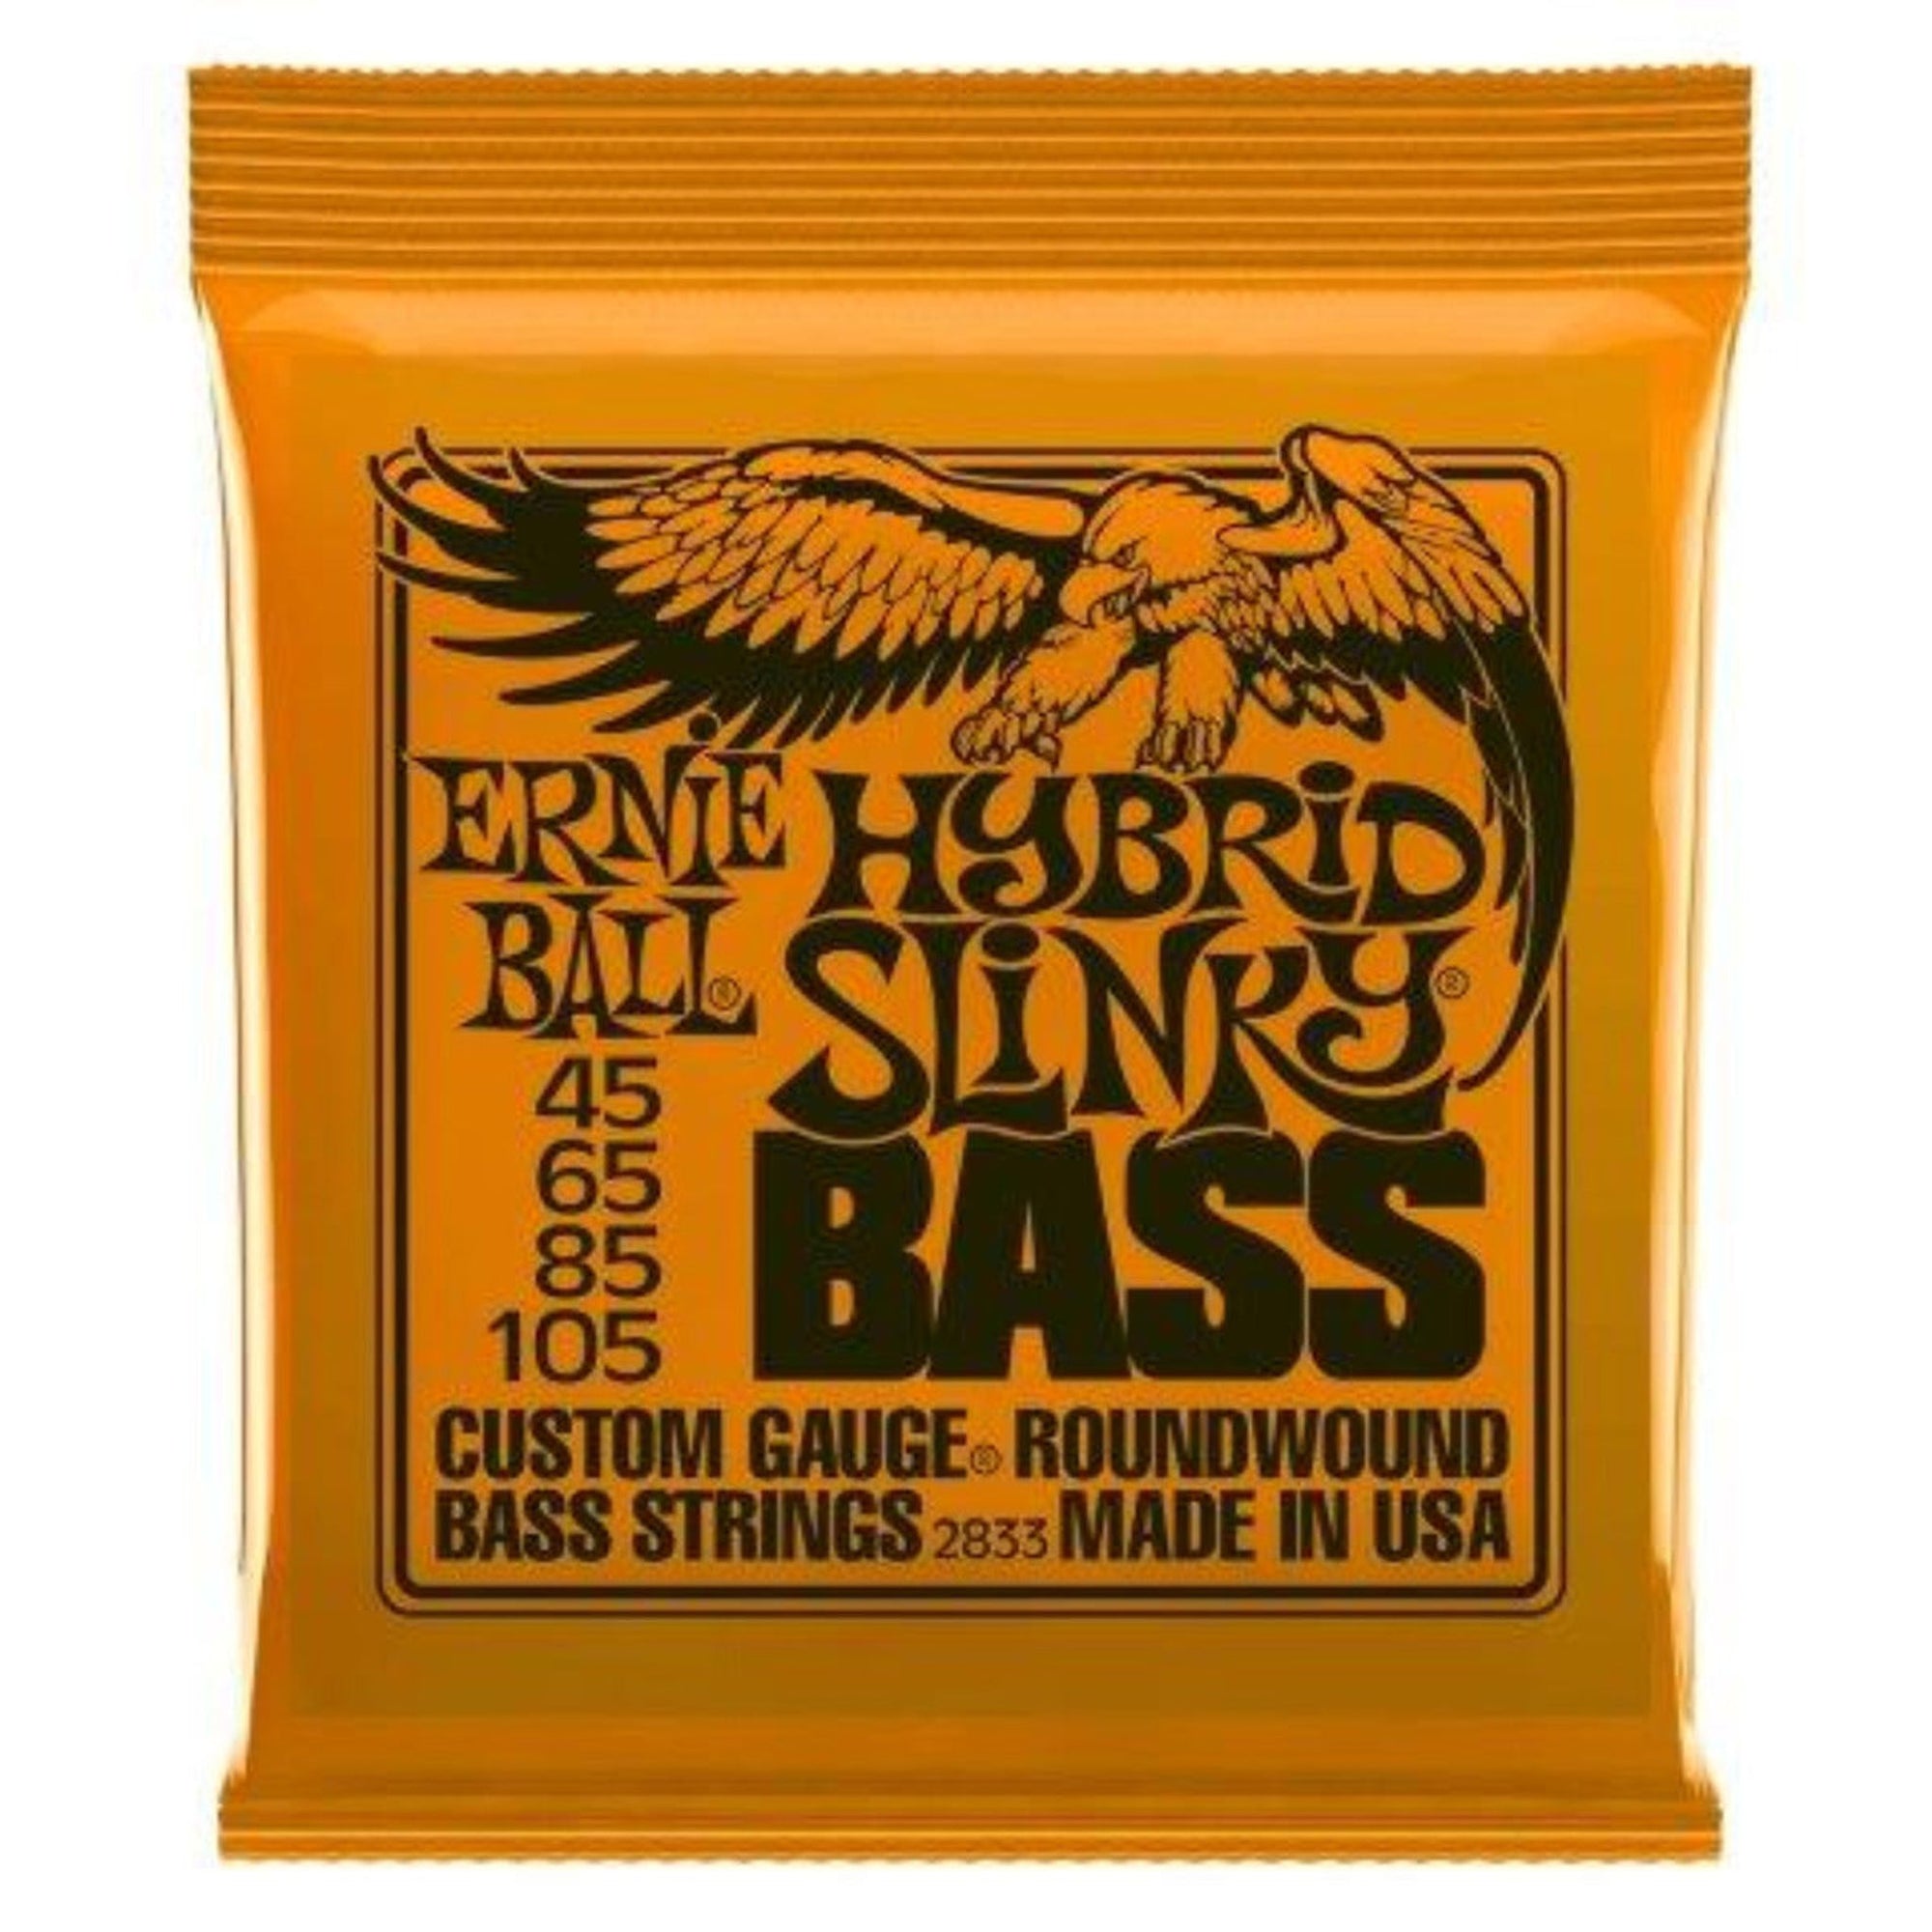 Ernie Ball Slinky Coated Electric Bass Nickelwound Strings combine the latest technological advancements in string manufacturing. These strings maintain the feel and sound of uncoated strings, combining the added protection with the vibrant tone Ernie Ball customers have relied on for over 50 years.